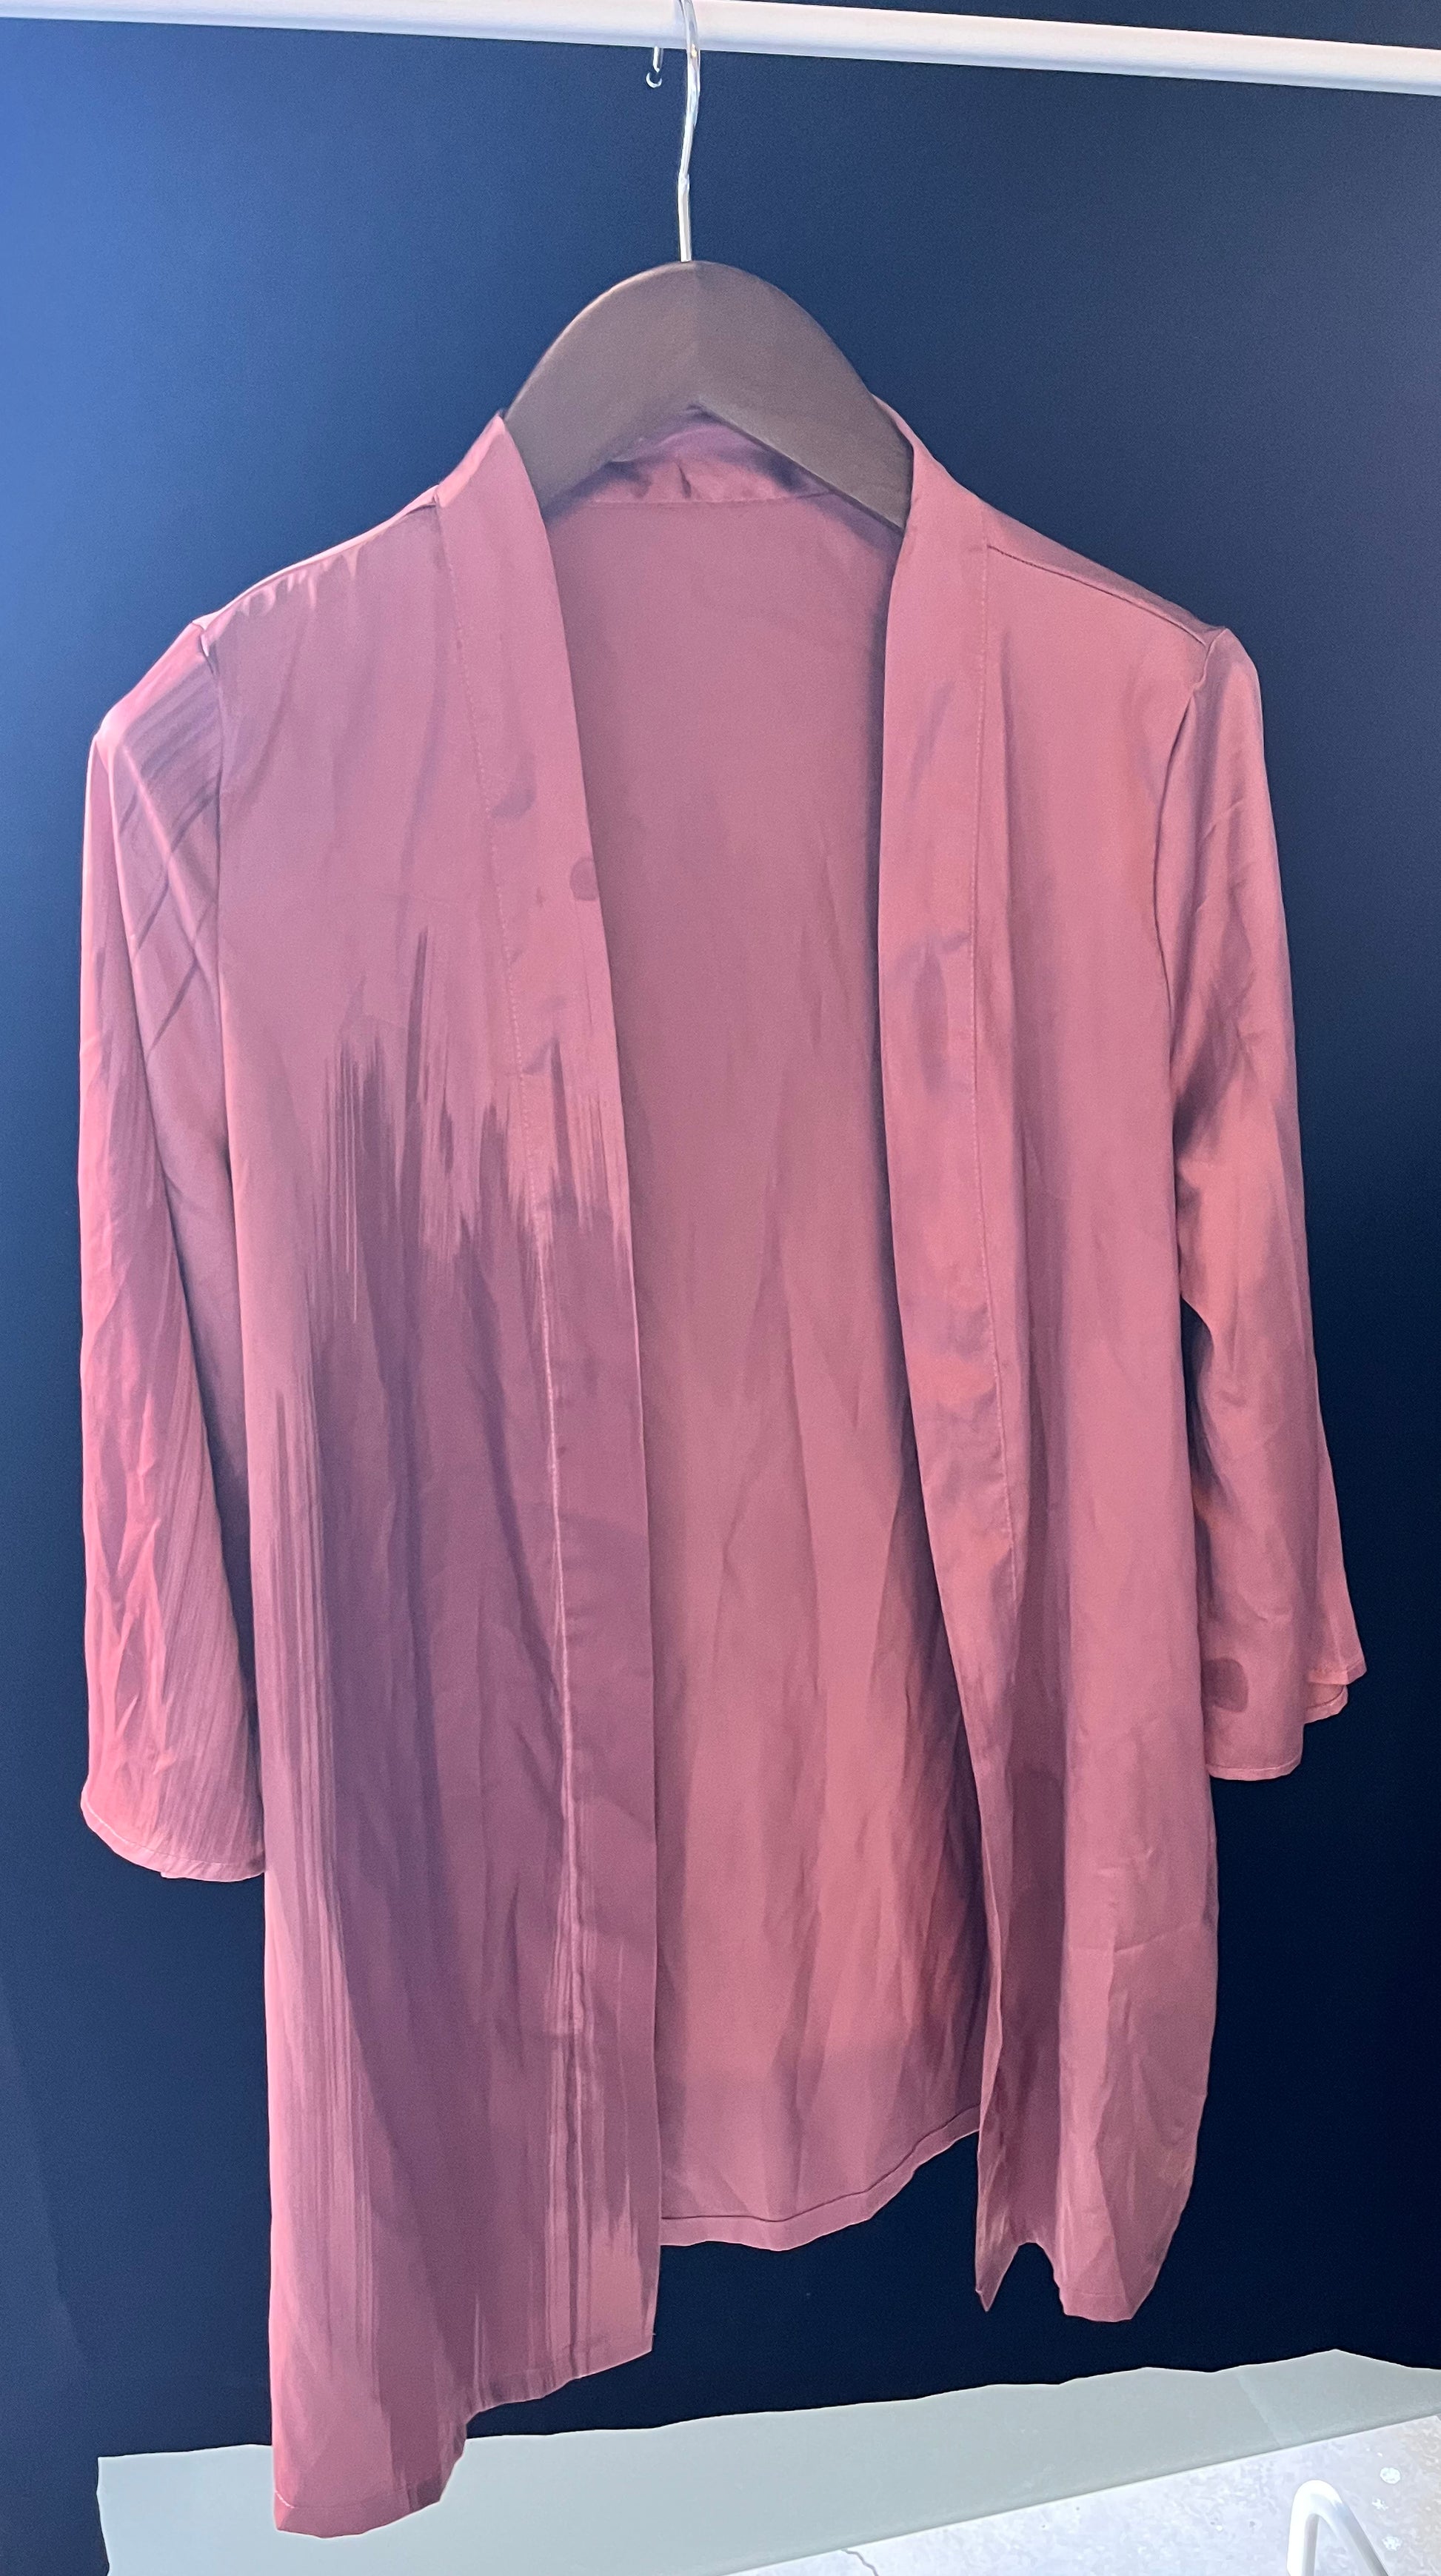 AHS Hotel: The Countess Nude Robe (S)